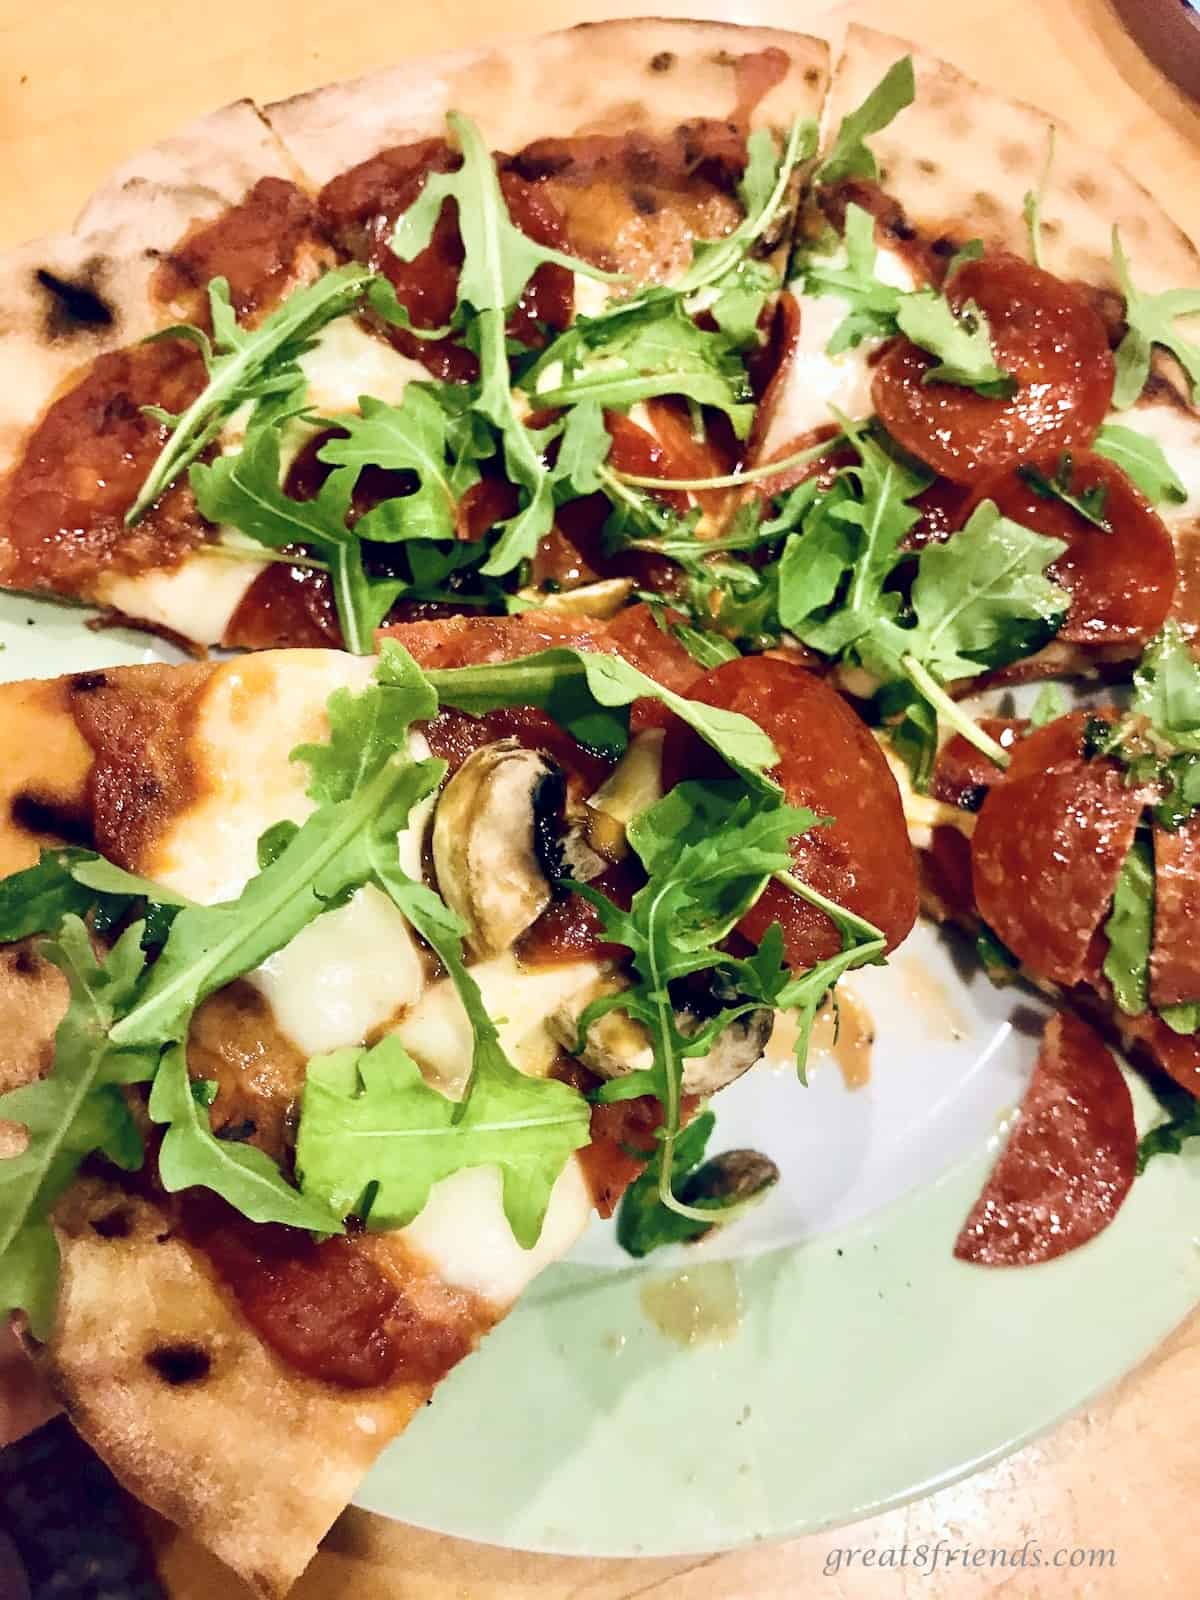 Unclose photo of a pizza cooked on the grill topped with sauce, cheese, pepperoni, and arugula.